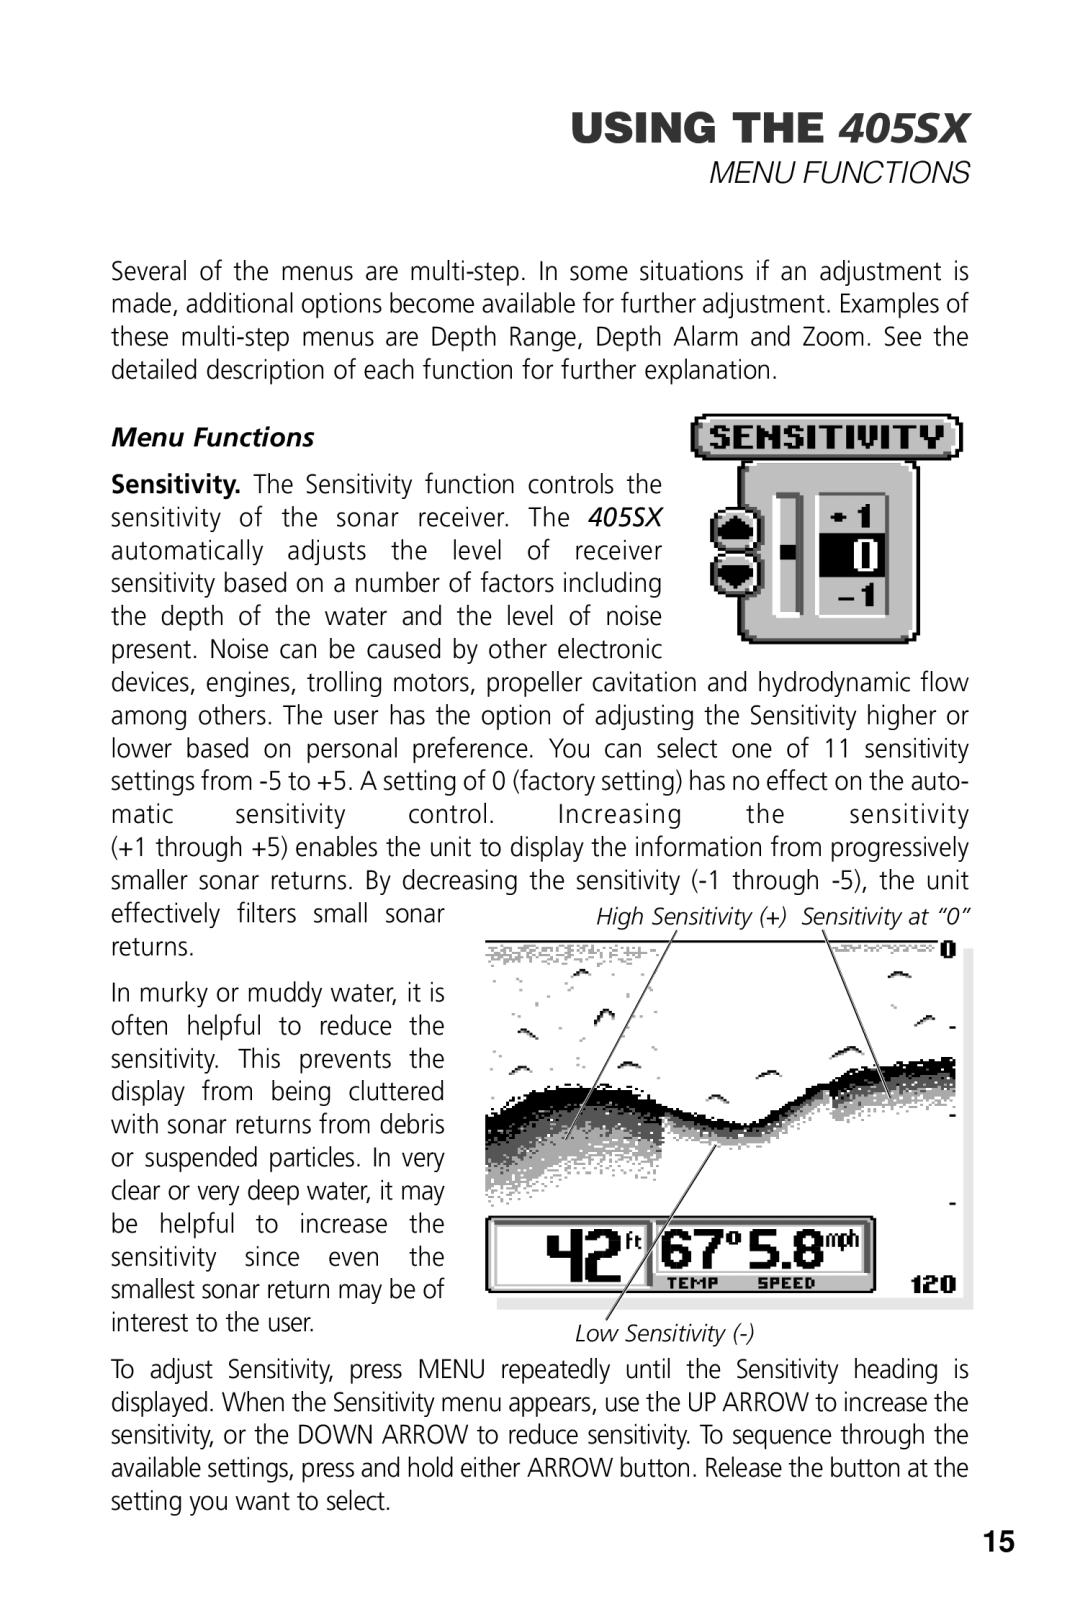 Humminbird manual Menu Functions, smallest sonar return may be of, interest to the user, USING THE 405SX 